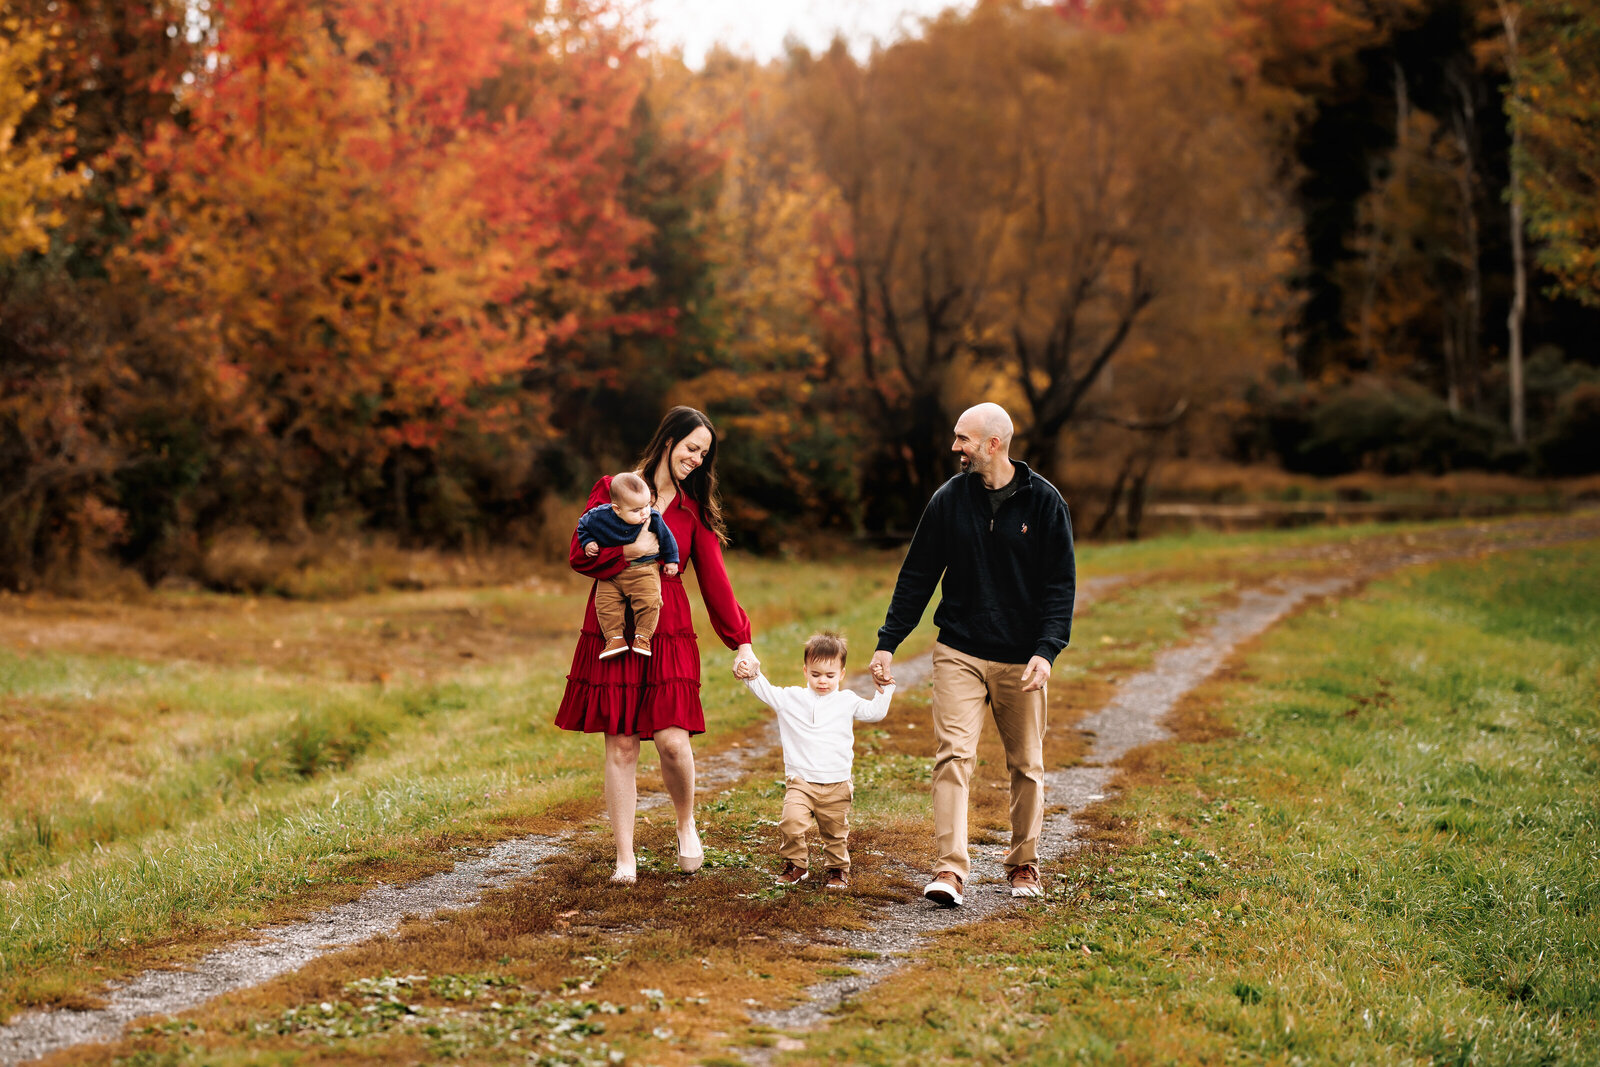 Holding hands, a family of 4 take a stroll along a path lined with gorgeous fall foliage